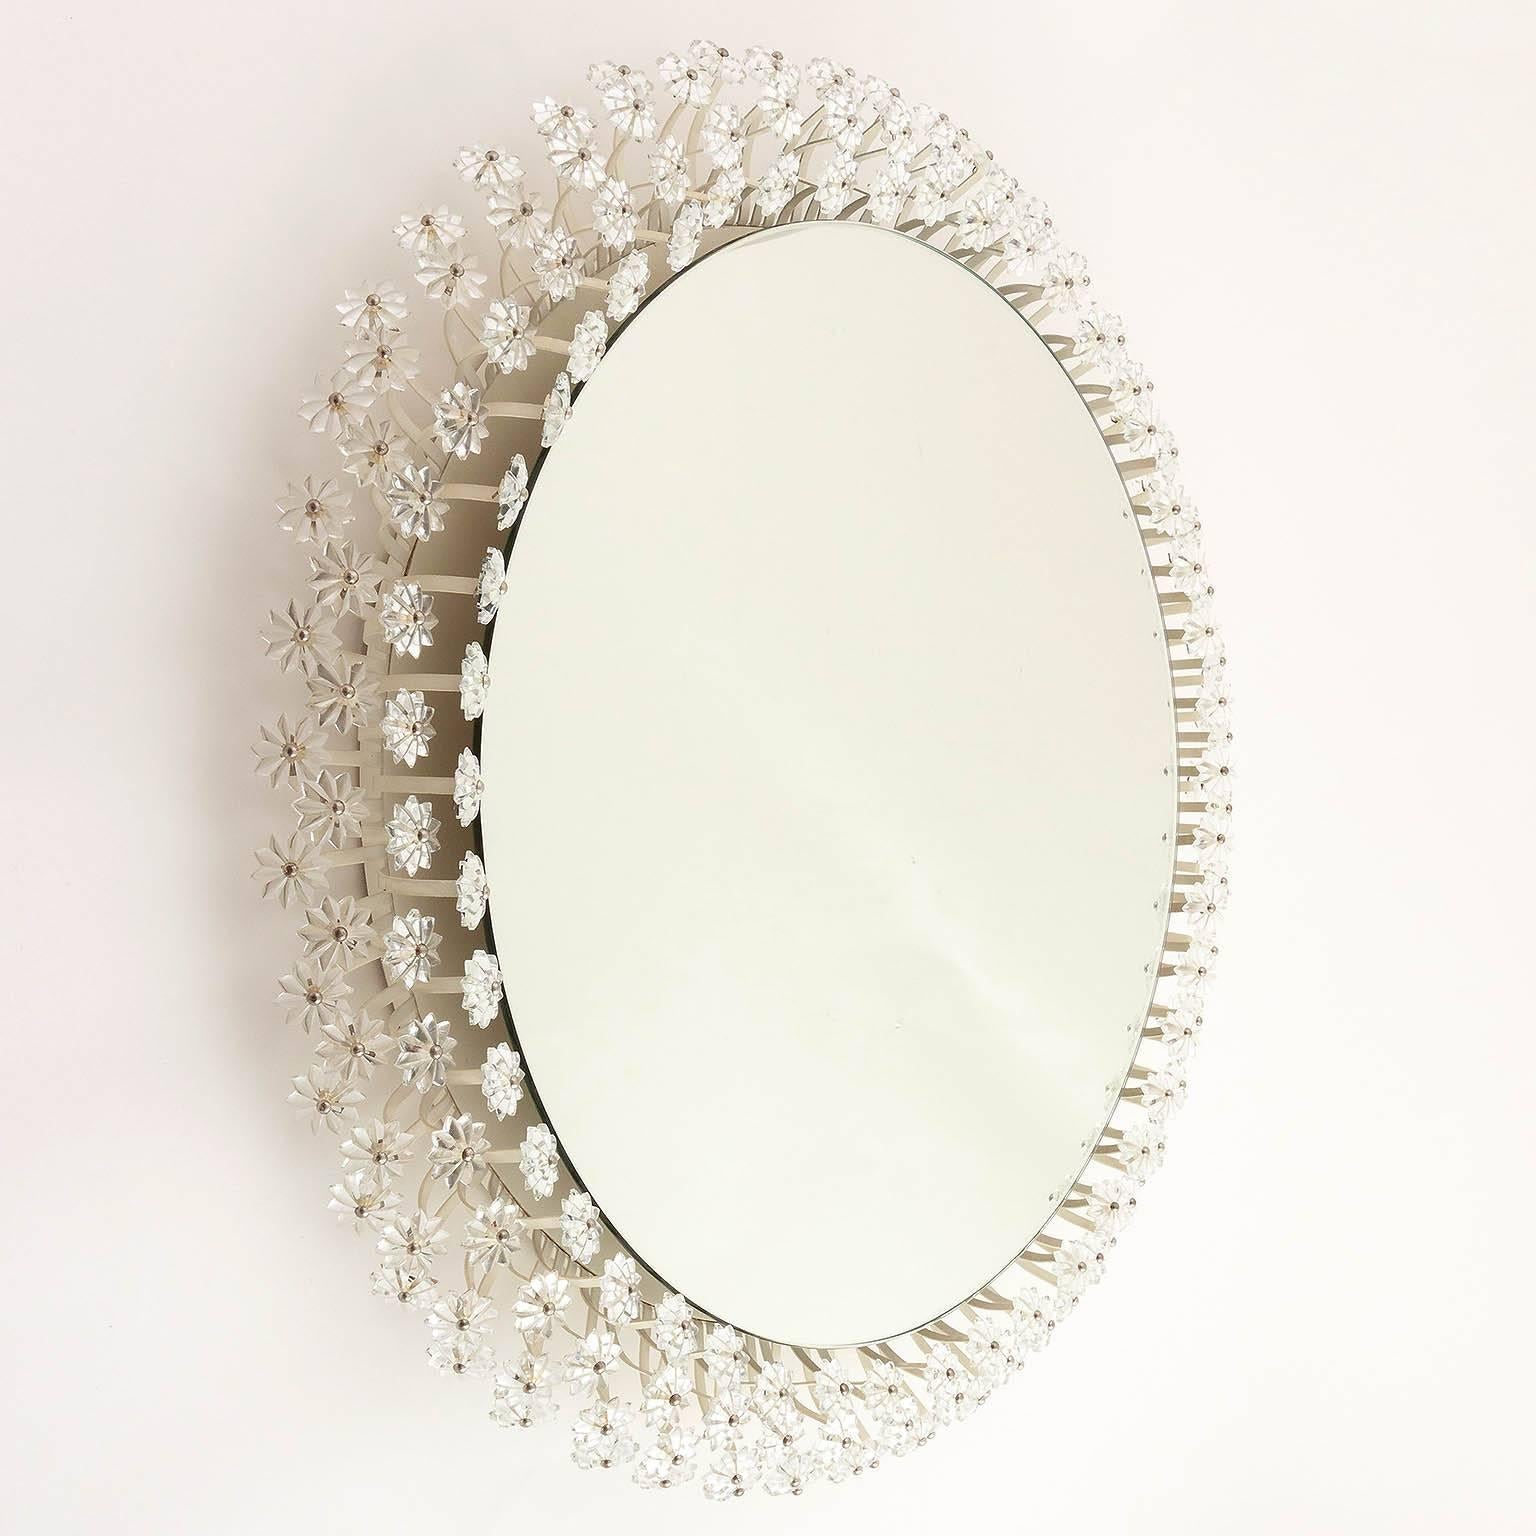 One of two large round wall mirrors with illuminated background and hundreds of lucite blossoms by Emil Stejnar for Rupert Nikoll, Austria.
The price is per mirror. They will be sold individually or as pair.

This mirror was designed in 1955 for the